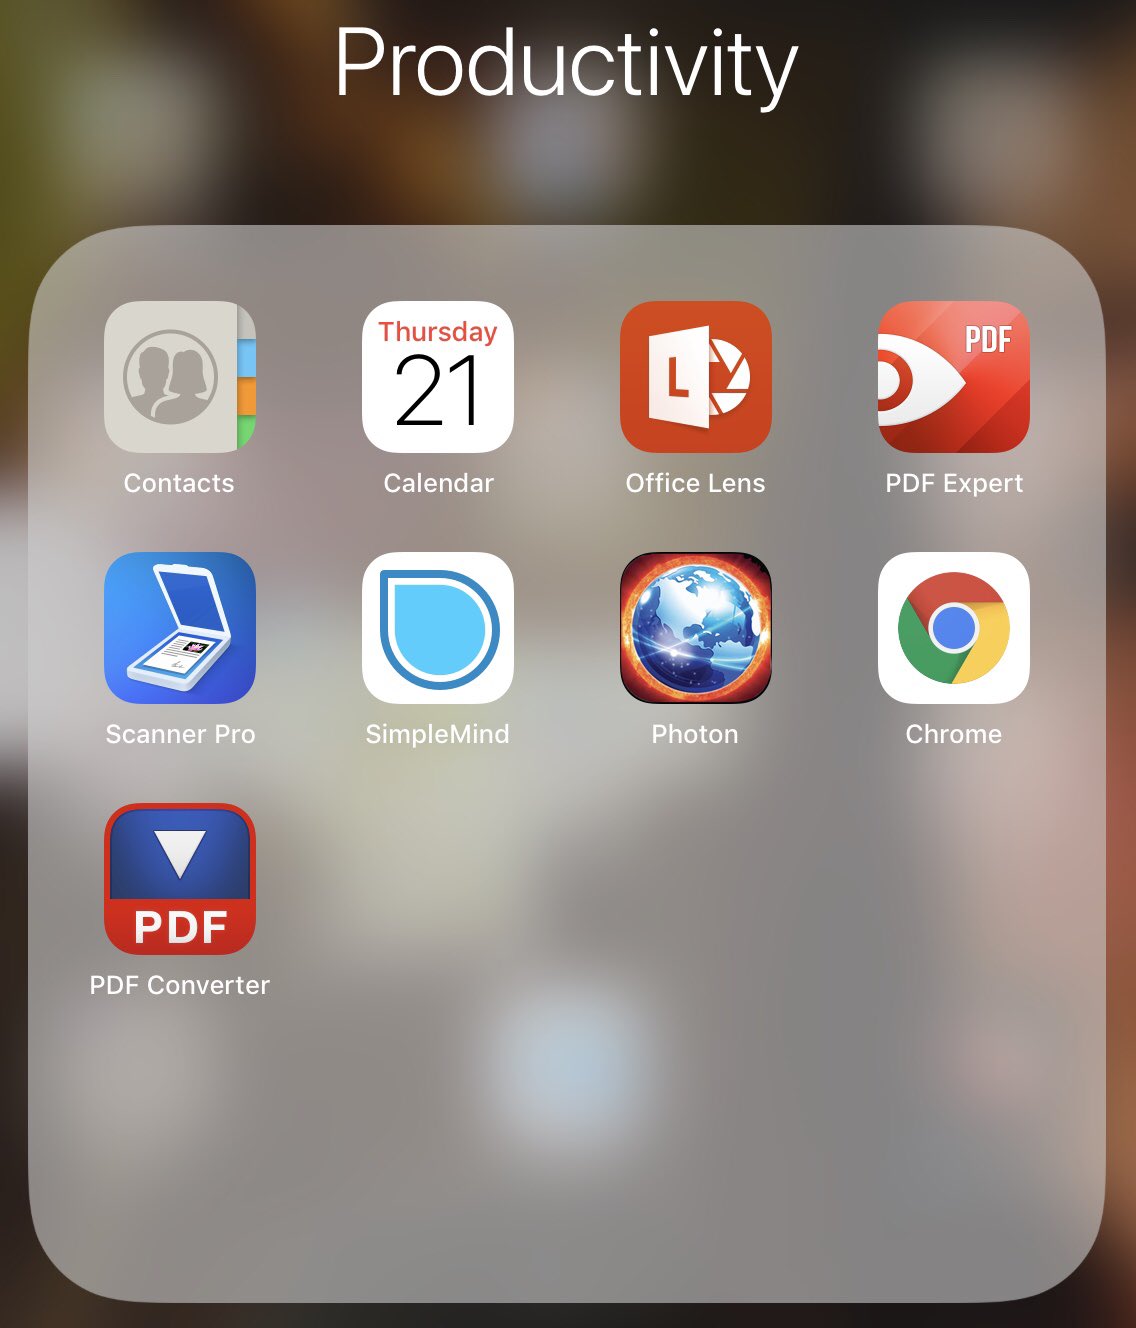 #lrnchat A5u These are my #iPad #productivity apps. Office Lens and#PDFexoert are my heavy hitters. Saw tons o use at #Devlearn capturing slides https://t.co/4zW48tWX5g